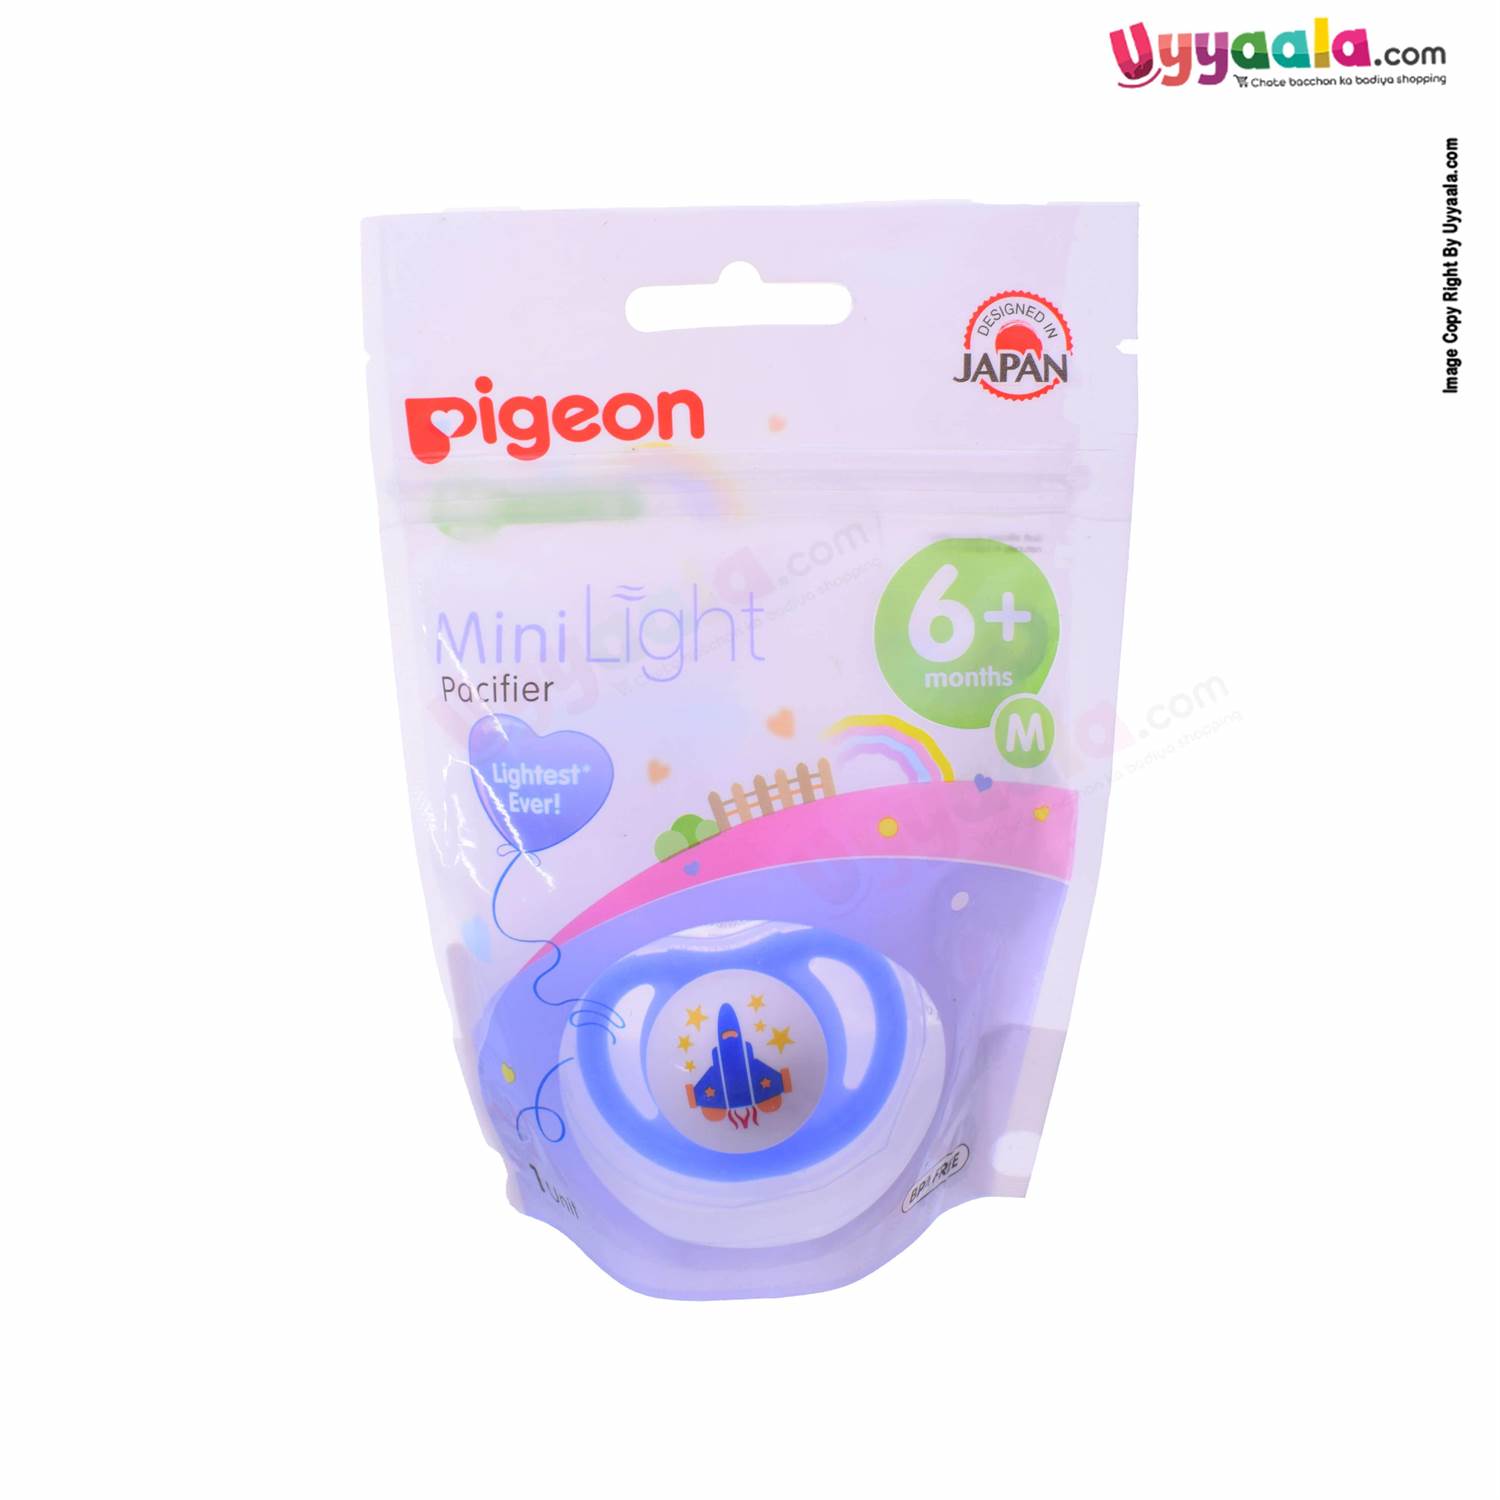 PIGEON Mini Light Baby Soother / Pacifier with Rocket Print 6+m Age - Blue